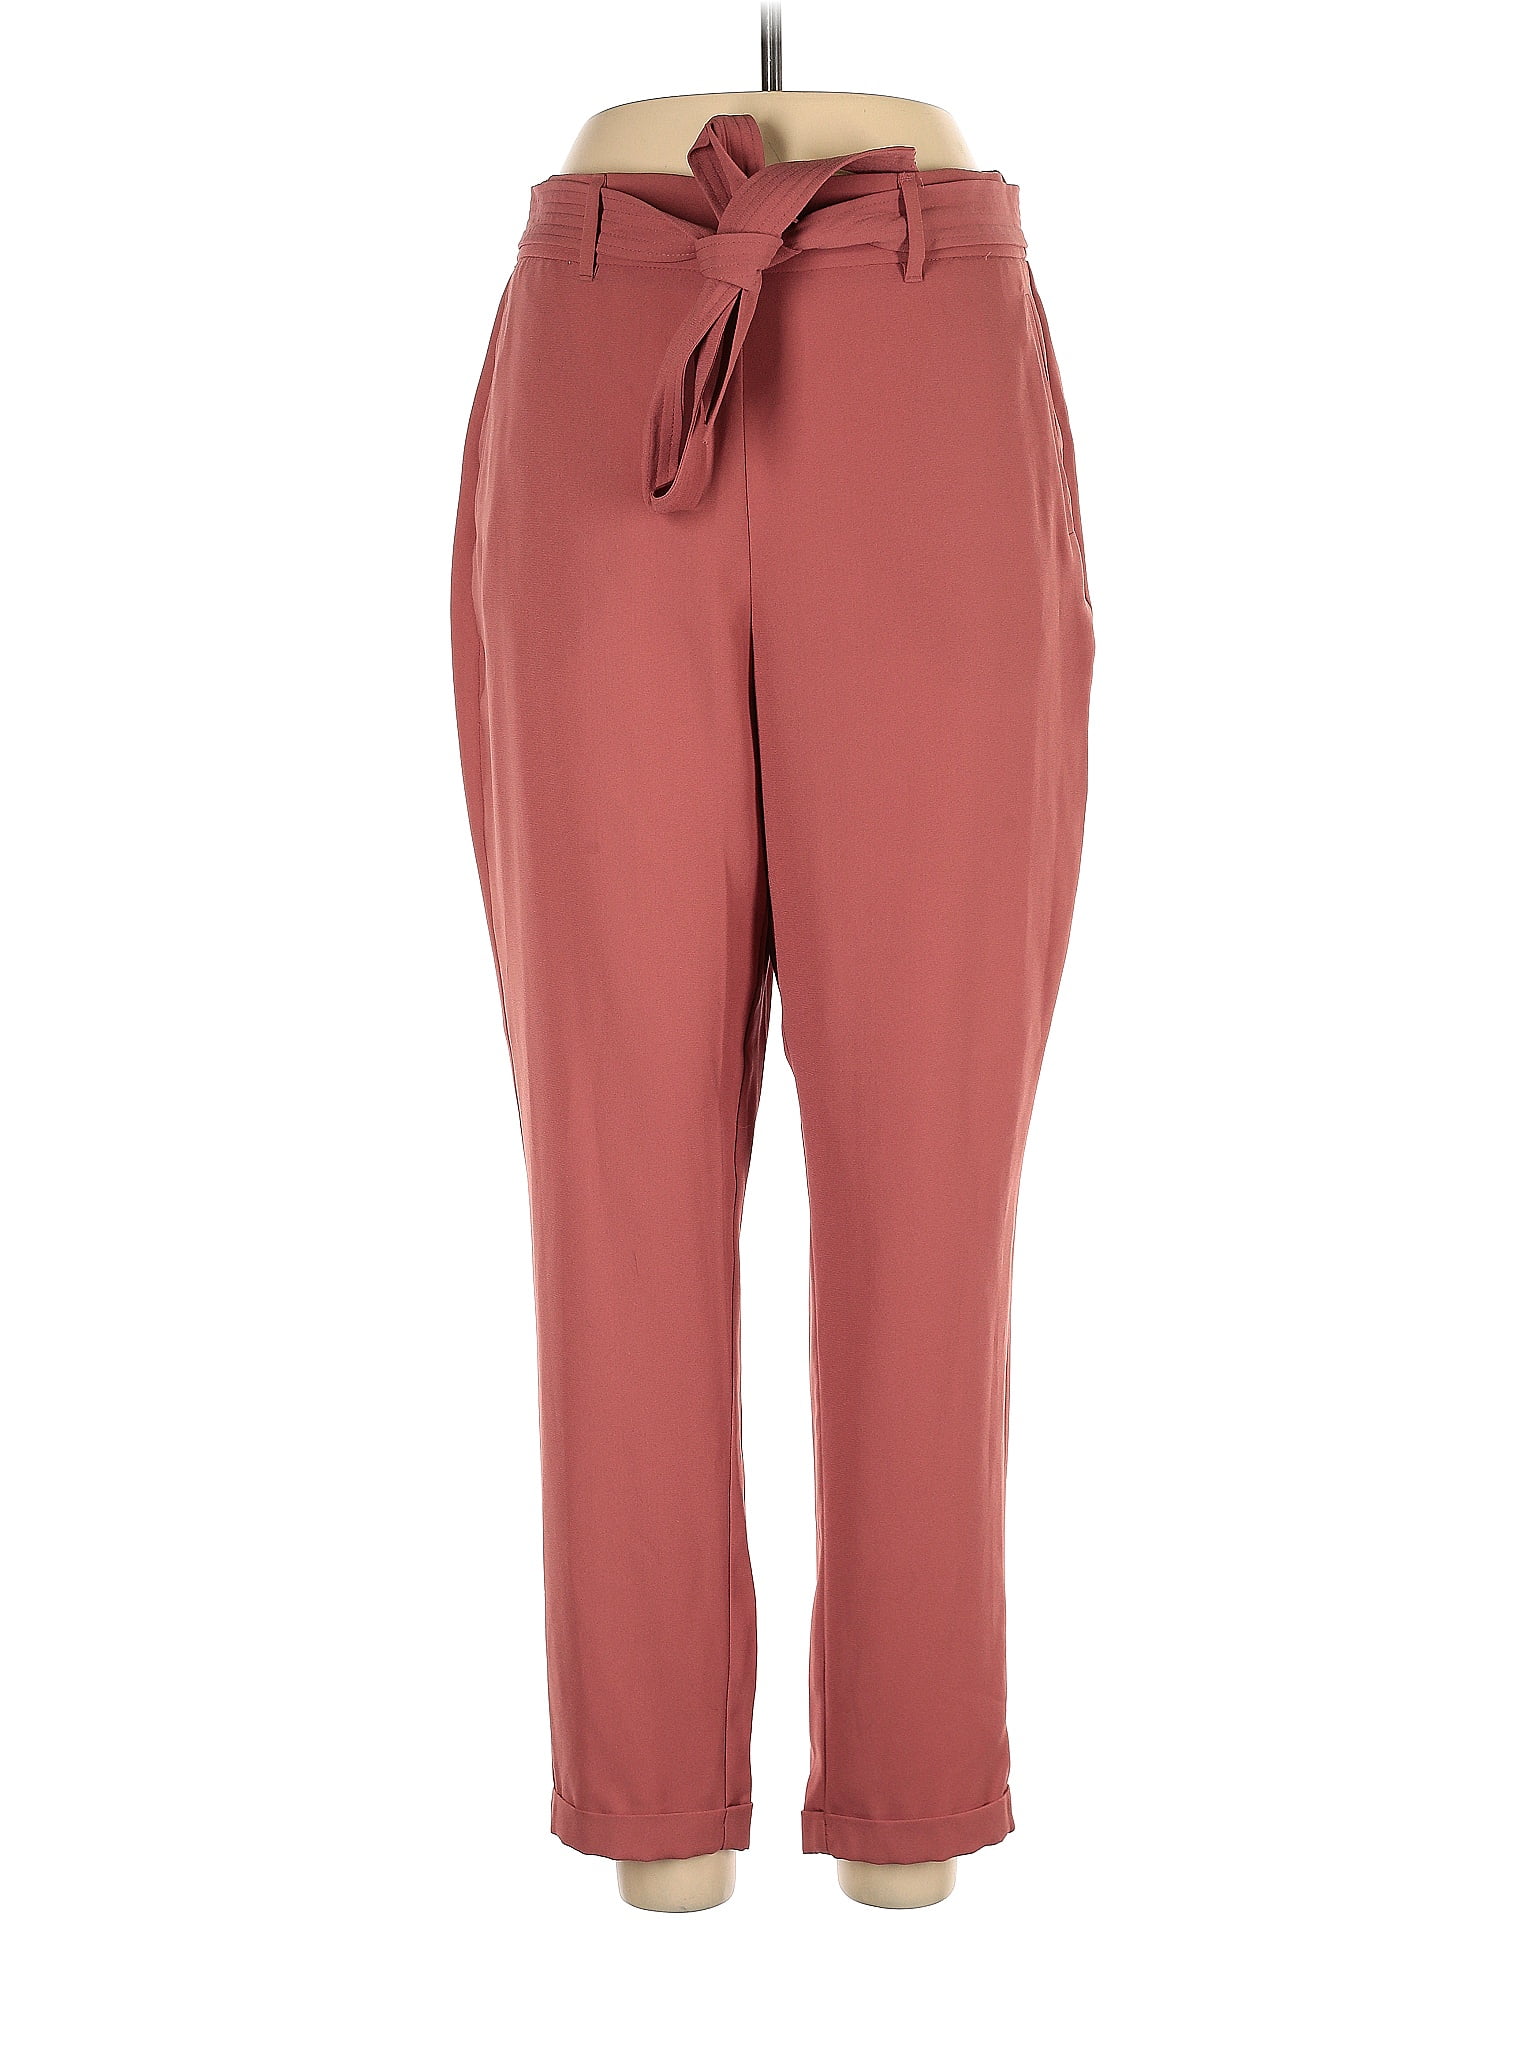 LC Lauren Conrad 100% Polyester Solid Pink Burgundy Casual Pants Size M -  71% off